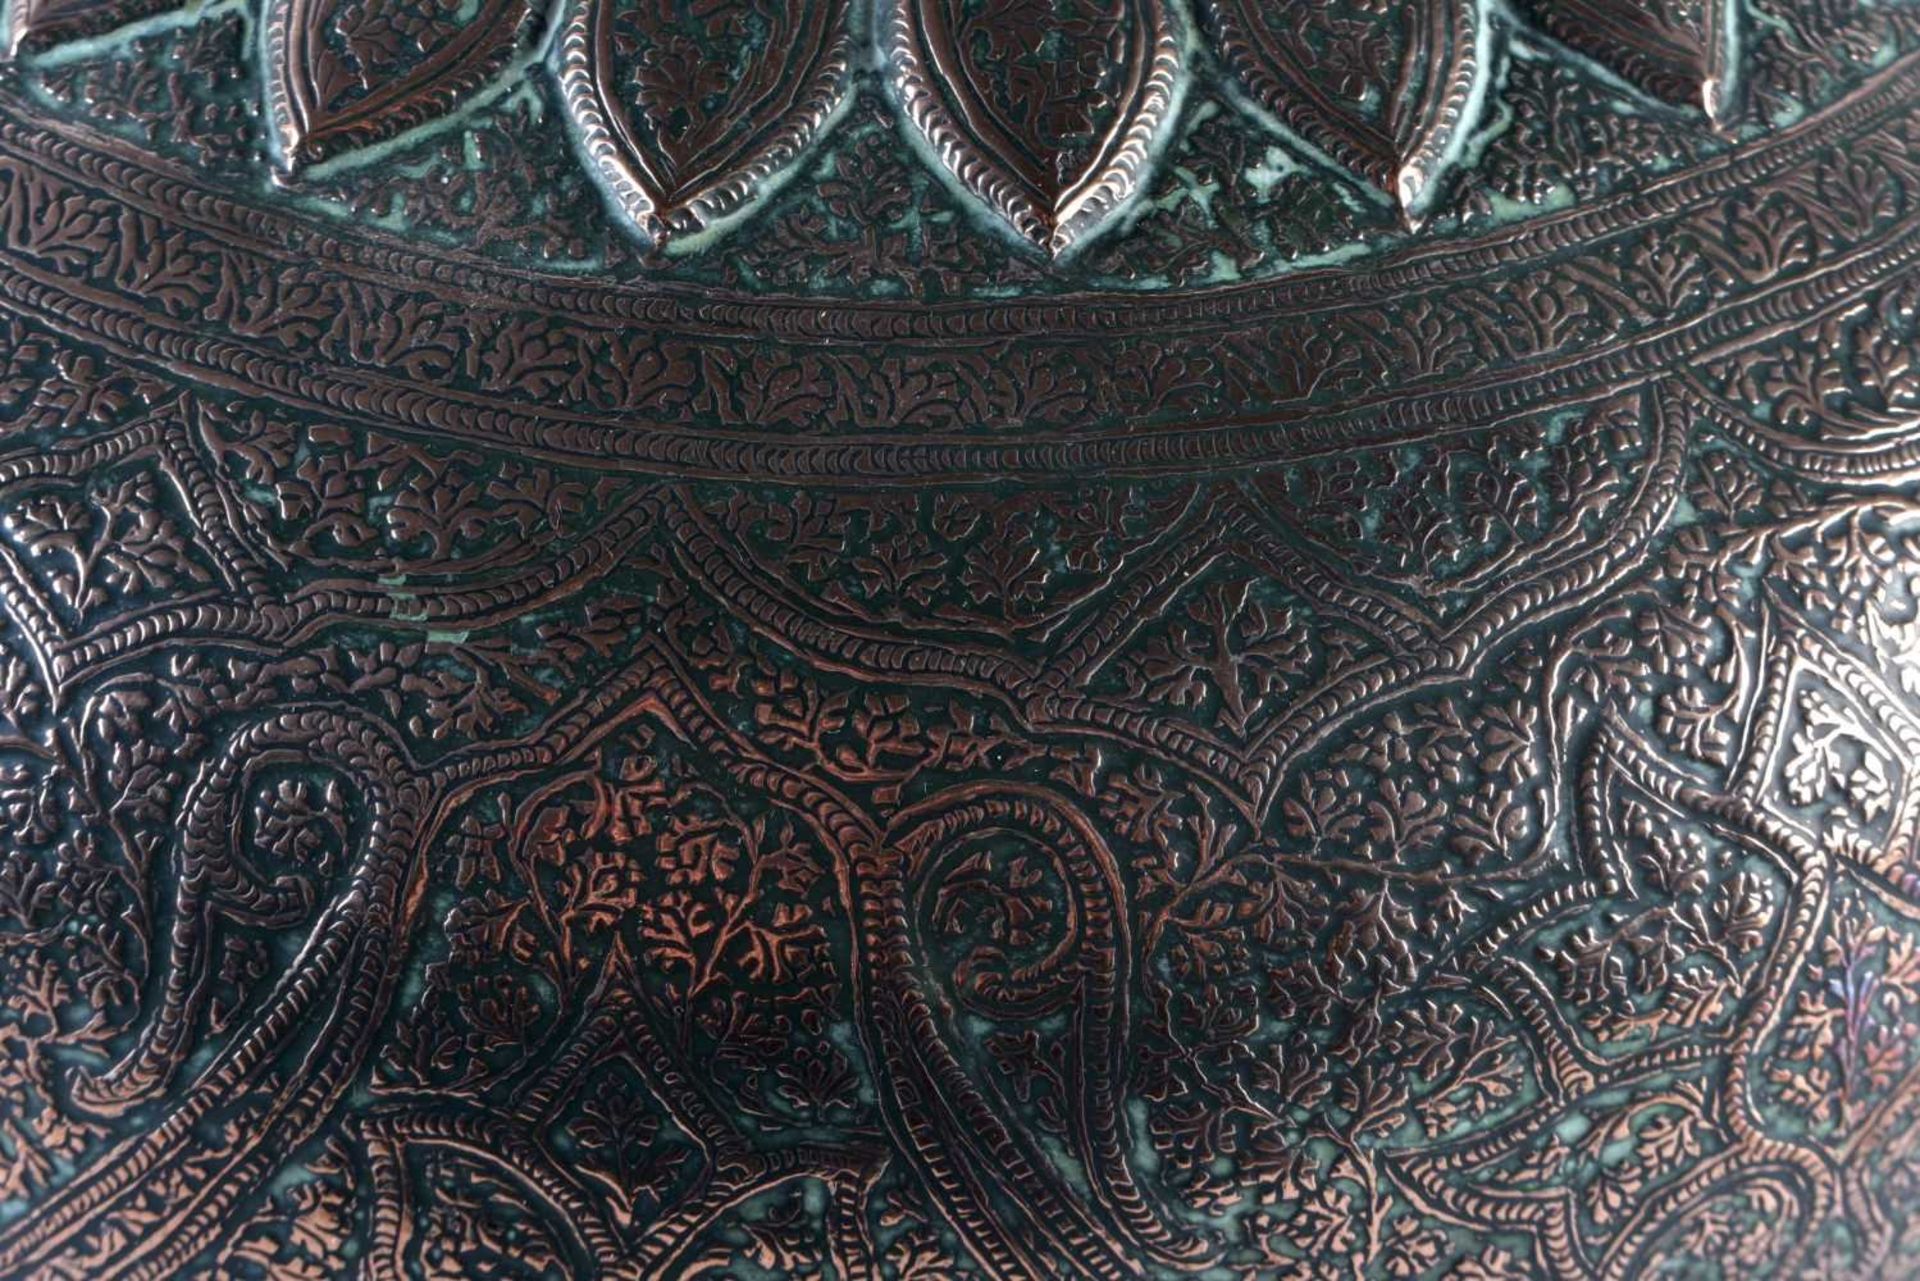 A VERY LARGE 19TH CENTURY MIDDLE EASTERN ISLAMIC BRONZE COPPER ALLOY VASE AND COVER decorated with - Image 2 of 7